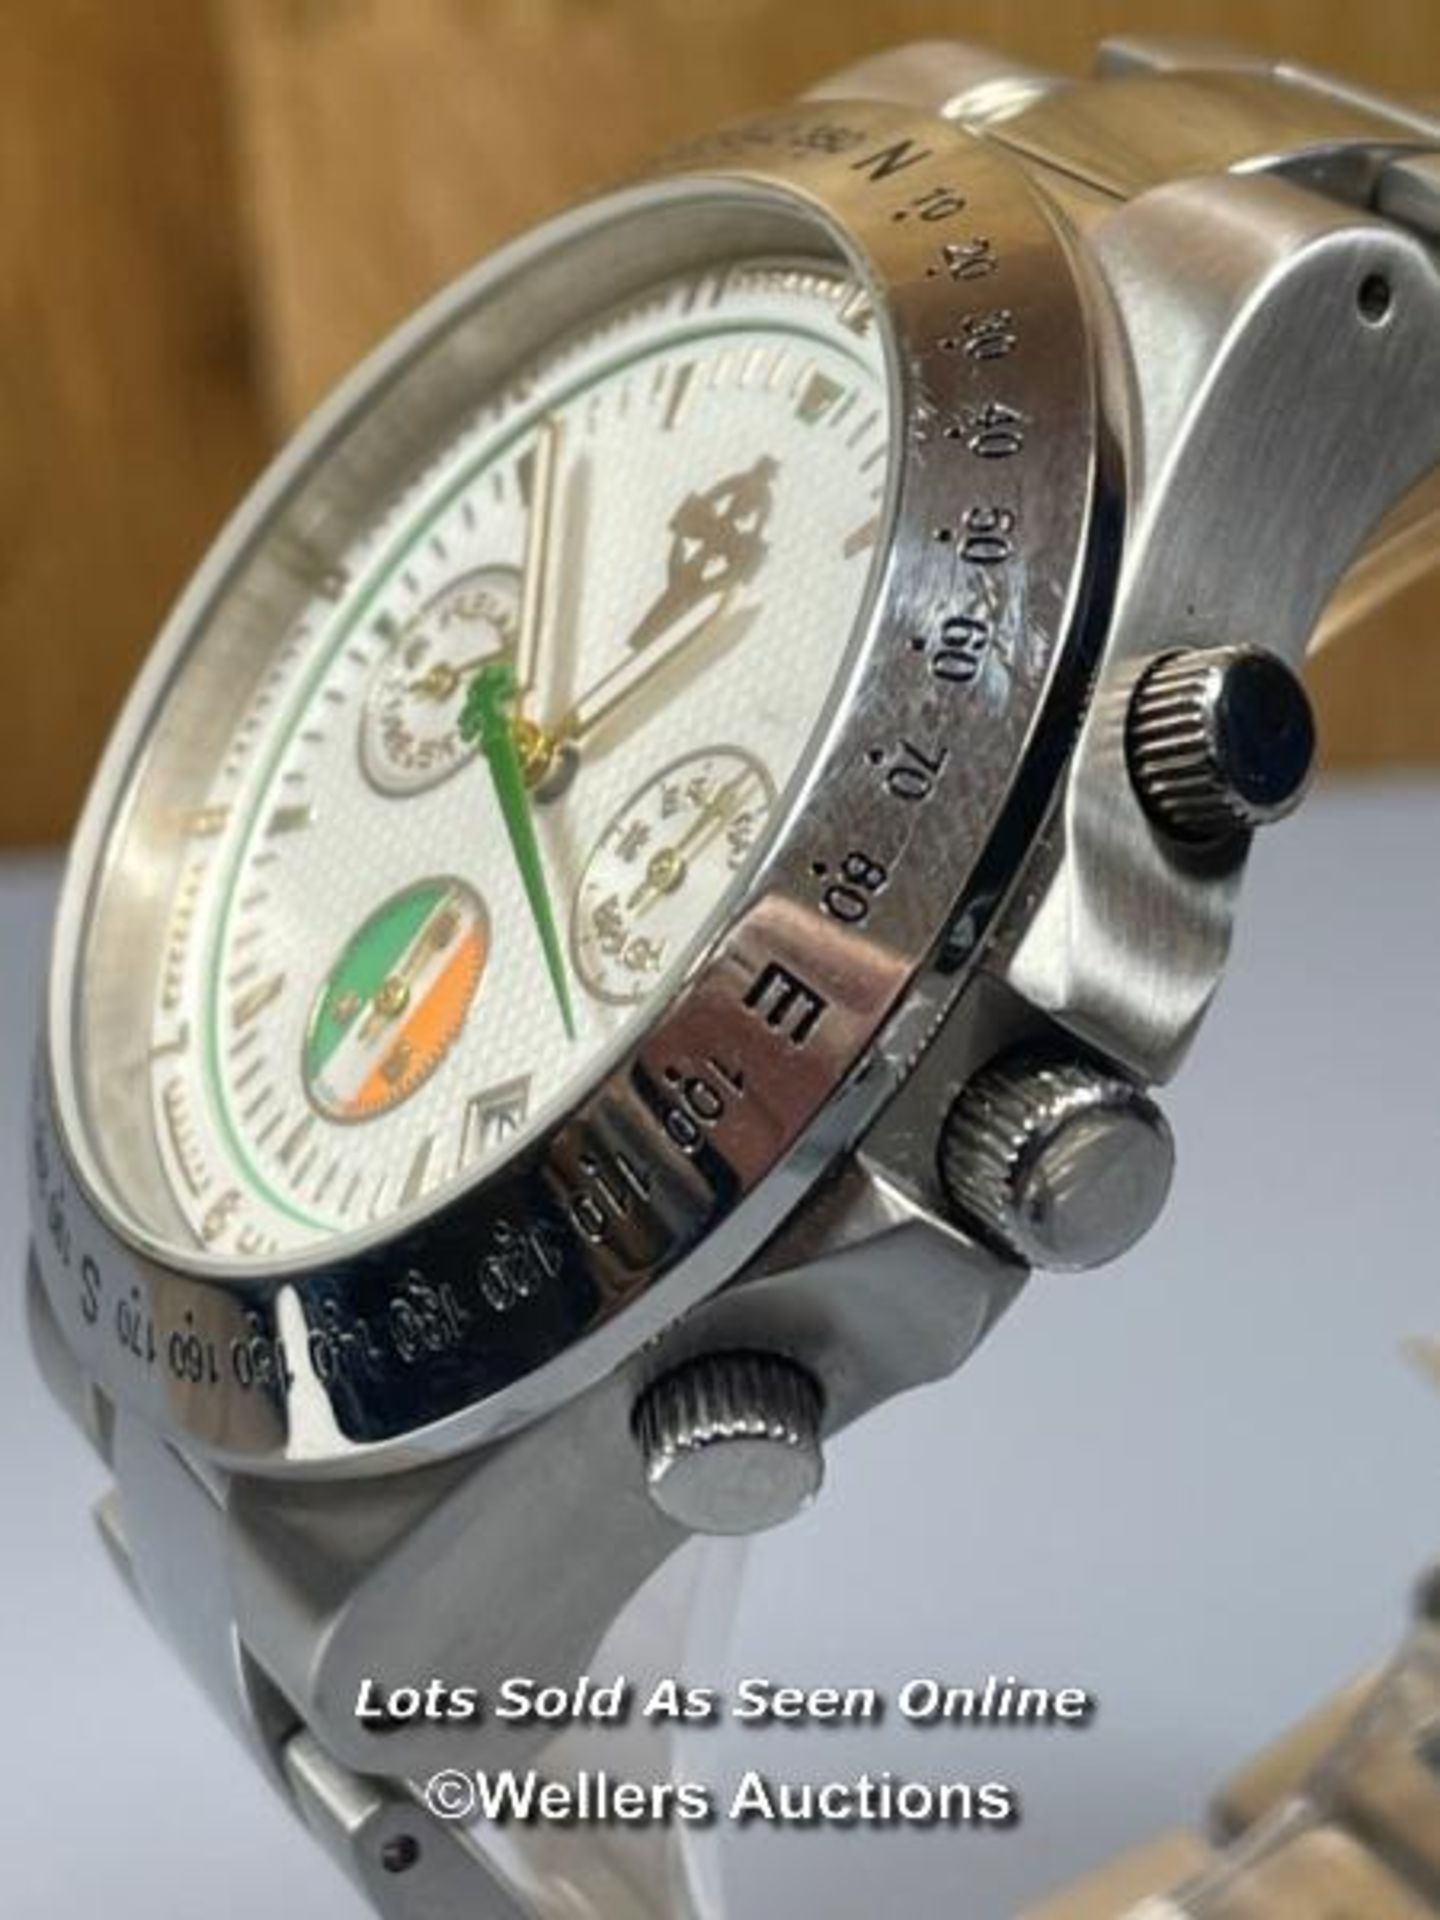 ERIN GO BRAGH GENTS WATCH LIMITED EDITION NO.1372 / 4999, GUINESS LOGO ON THE BRACELET - Image 2 of 5